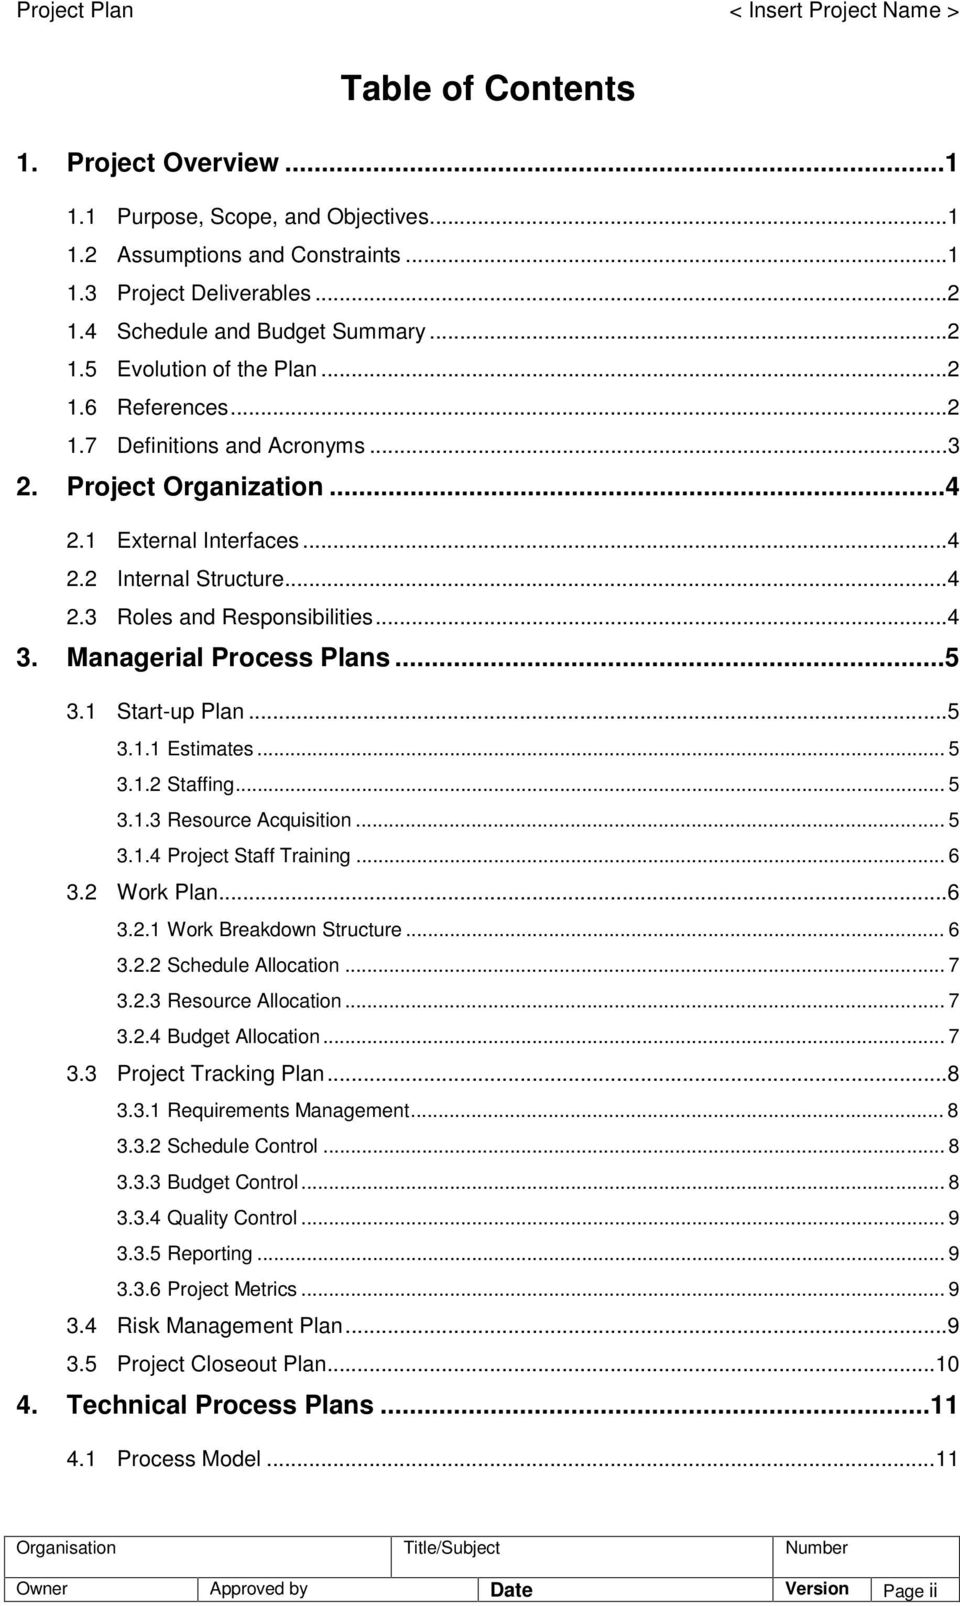 Managerial Process Plans...5 3.1 Start-up Plan...5 3.1.1 Estimates... 5 3.1.2 Staffing... 5 3.1.3 Resource Acquisition... 5 3.1.4 Project Staff Training... 6 3.2 Work Plan...6 3.2.1 Work Breakdown Structure.